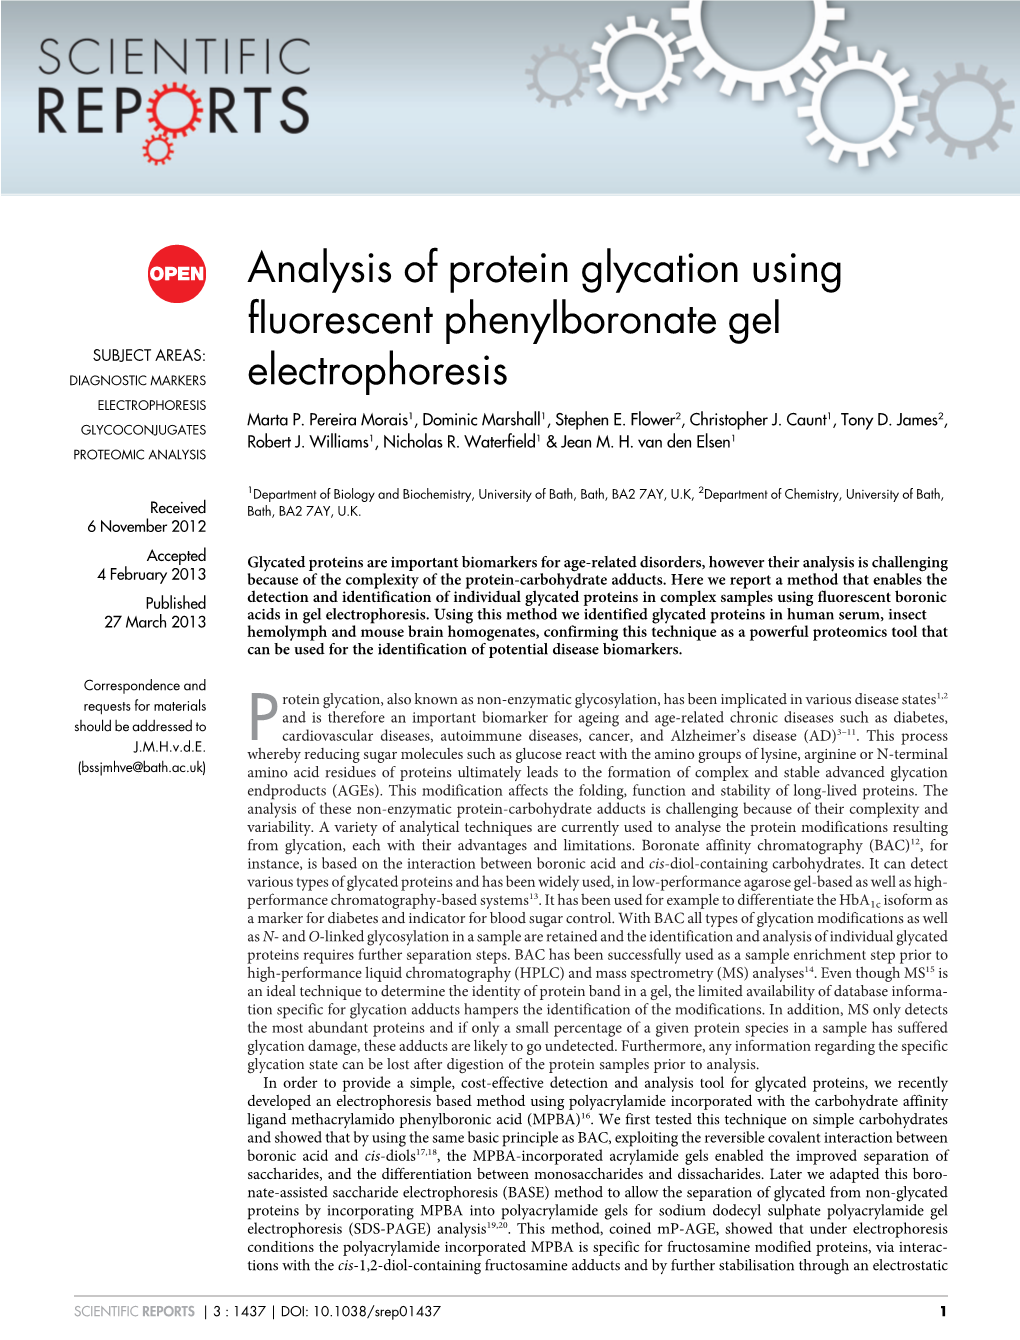 Analysis of Protein Glycation Using Fluorescent Phenylboronate Gel SUBJECT AREAS: DIAGNOSTIC MARKERS Electrophoresis ELECTROPHORESIS Marta P